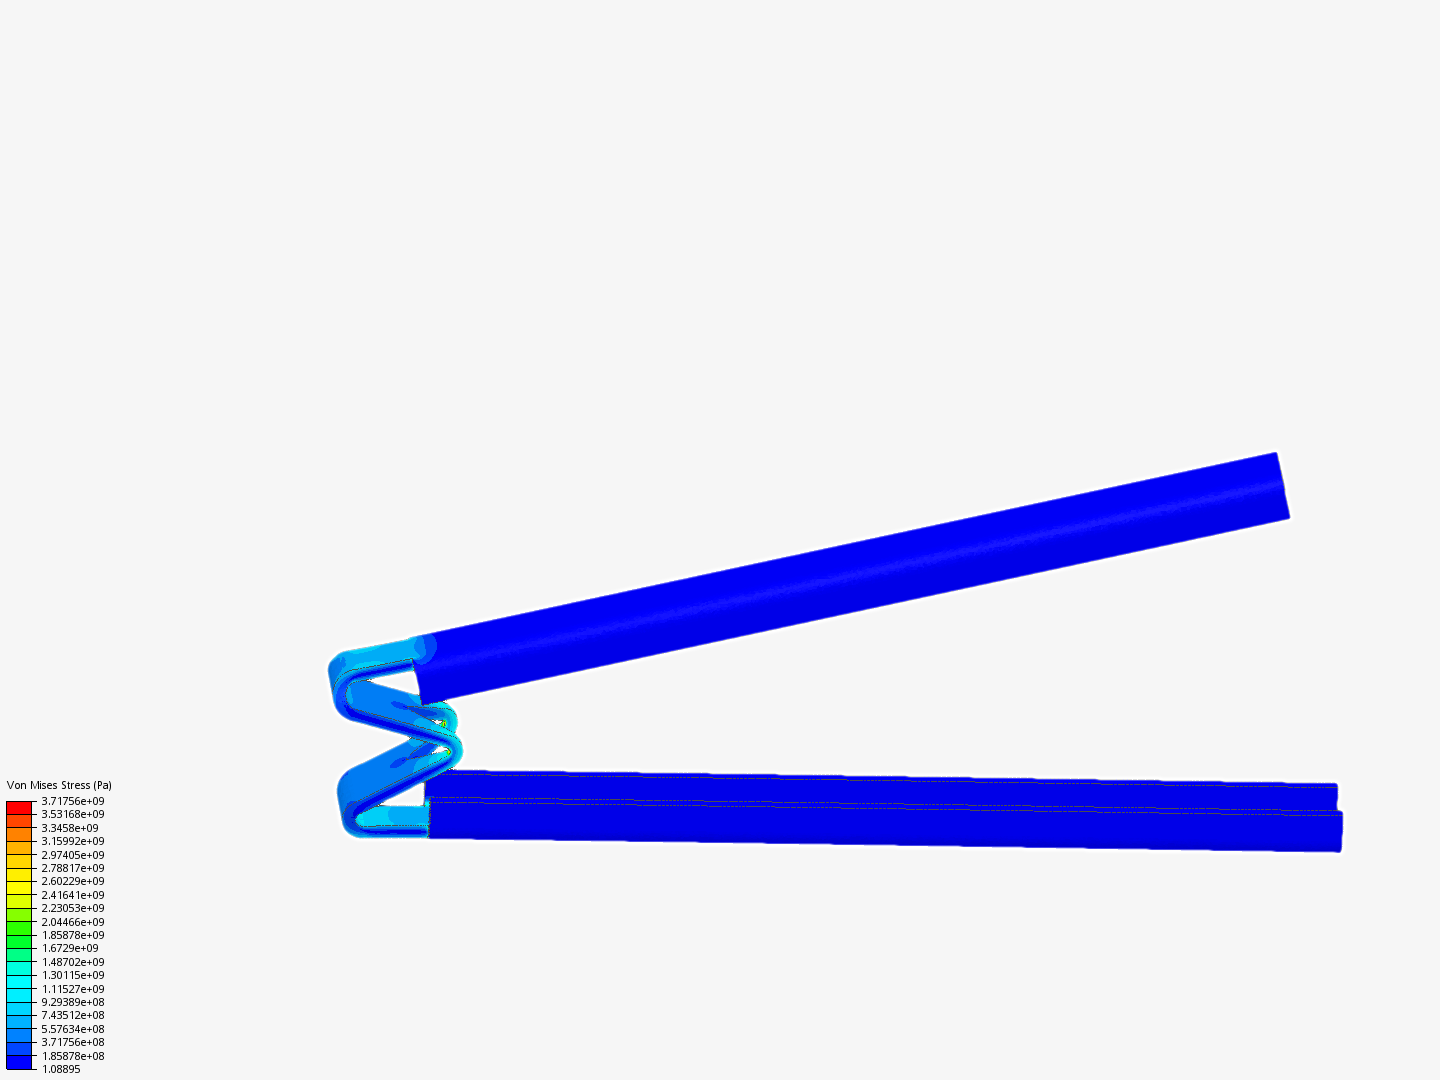 Z-Clip to test from Onshape image